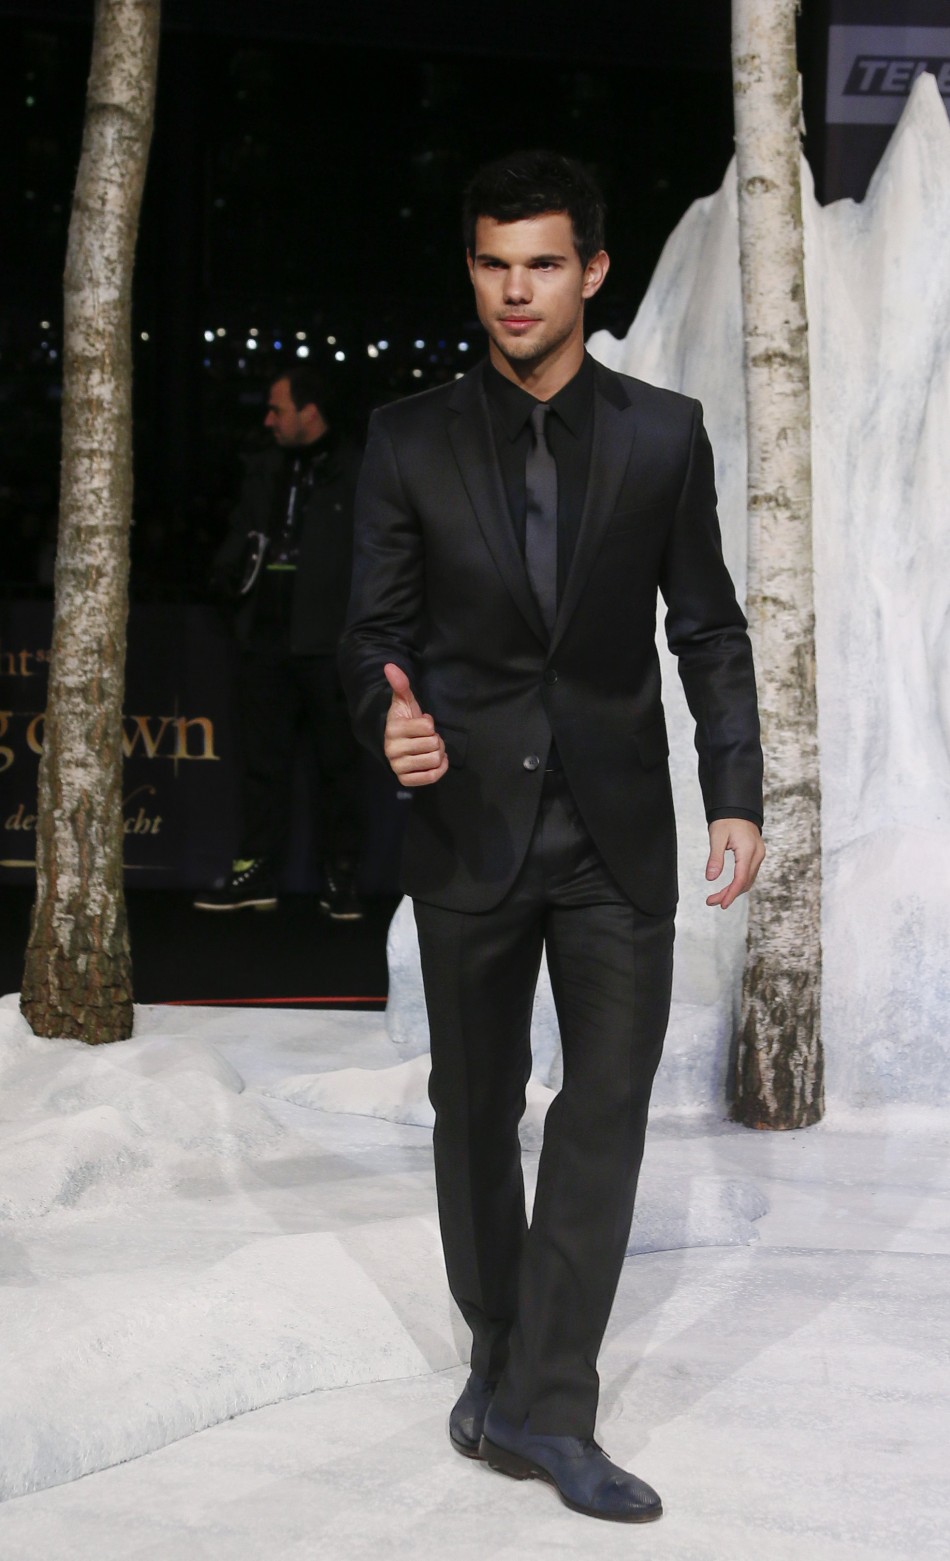 Lautner poses for pictures before German premiere of The Twilight Saga Breaking Dawn Part 2 in Berlin